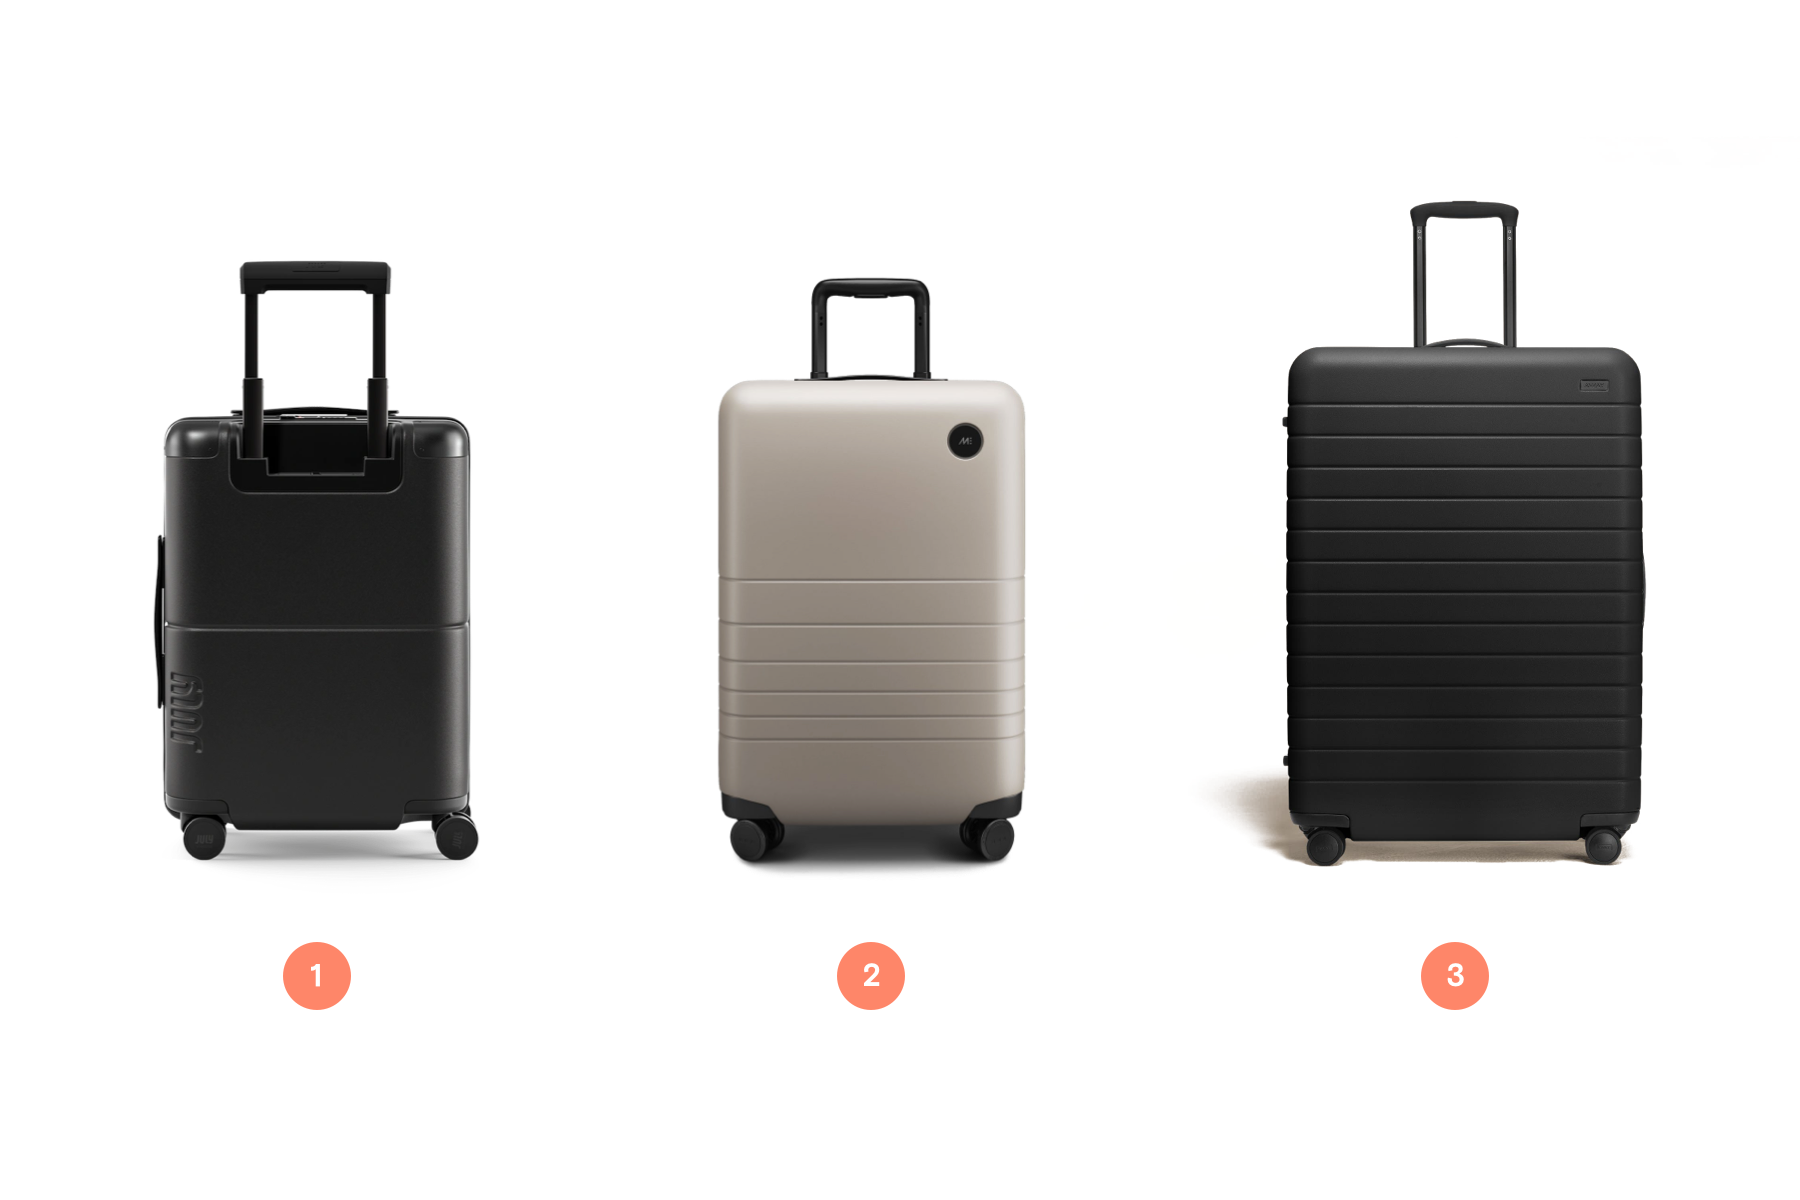 Three types of hard-shell luggage as recommended by the article.